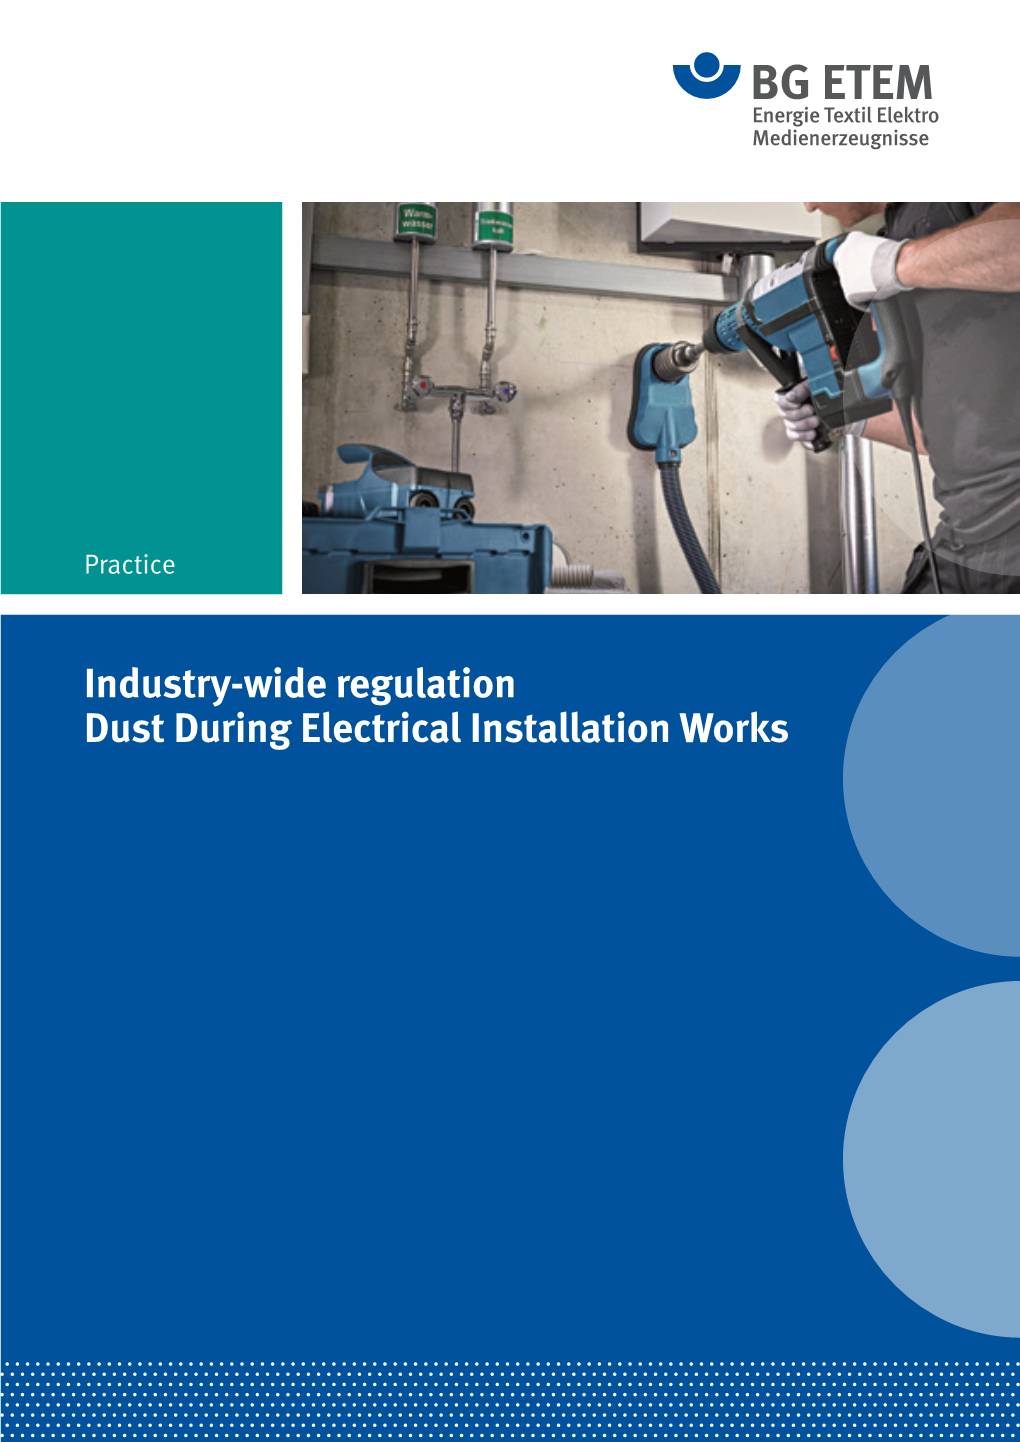 Industry-Wide Regulation, Dust During Electrical Installation Works